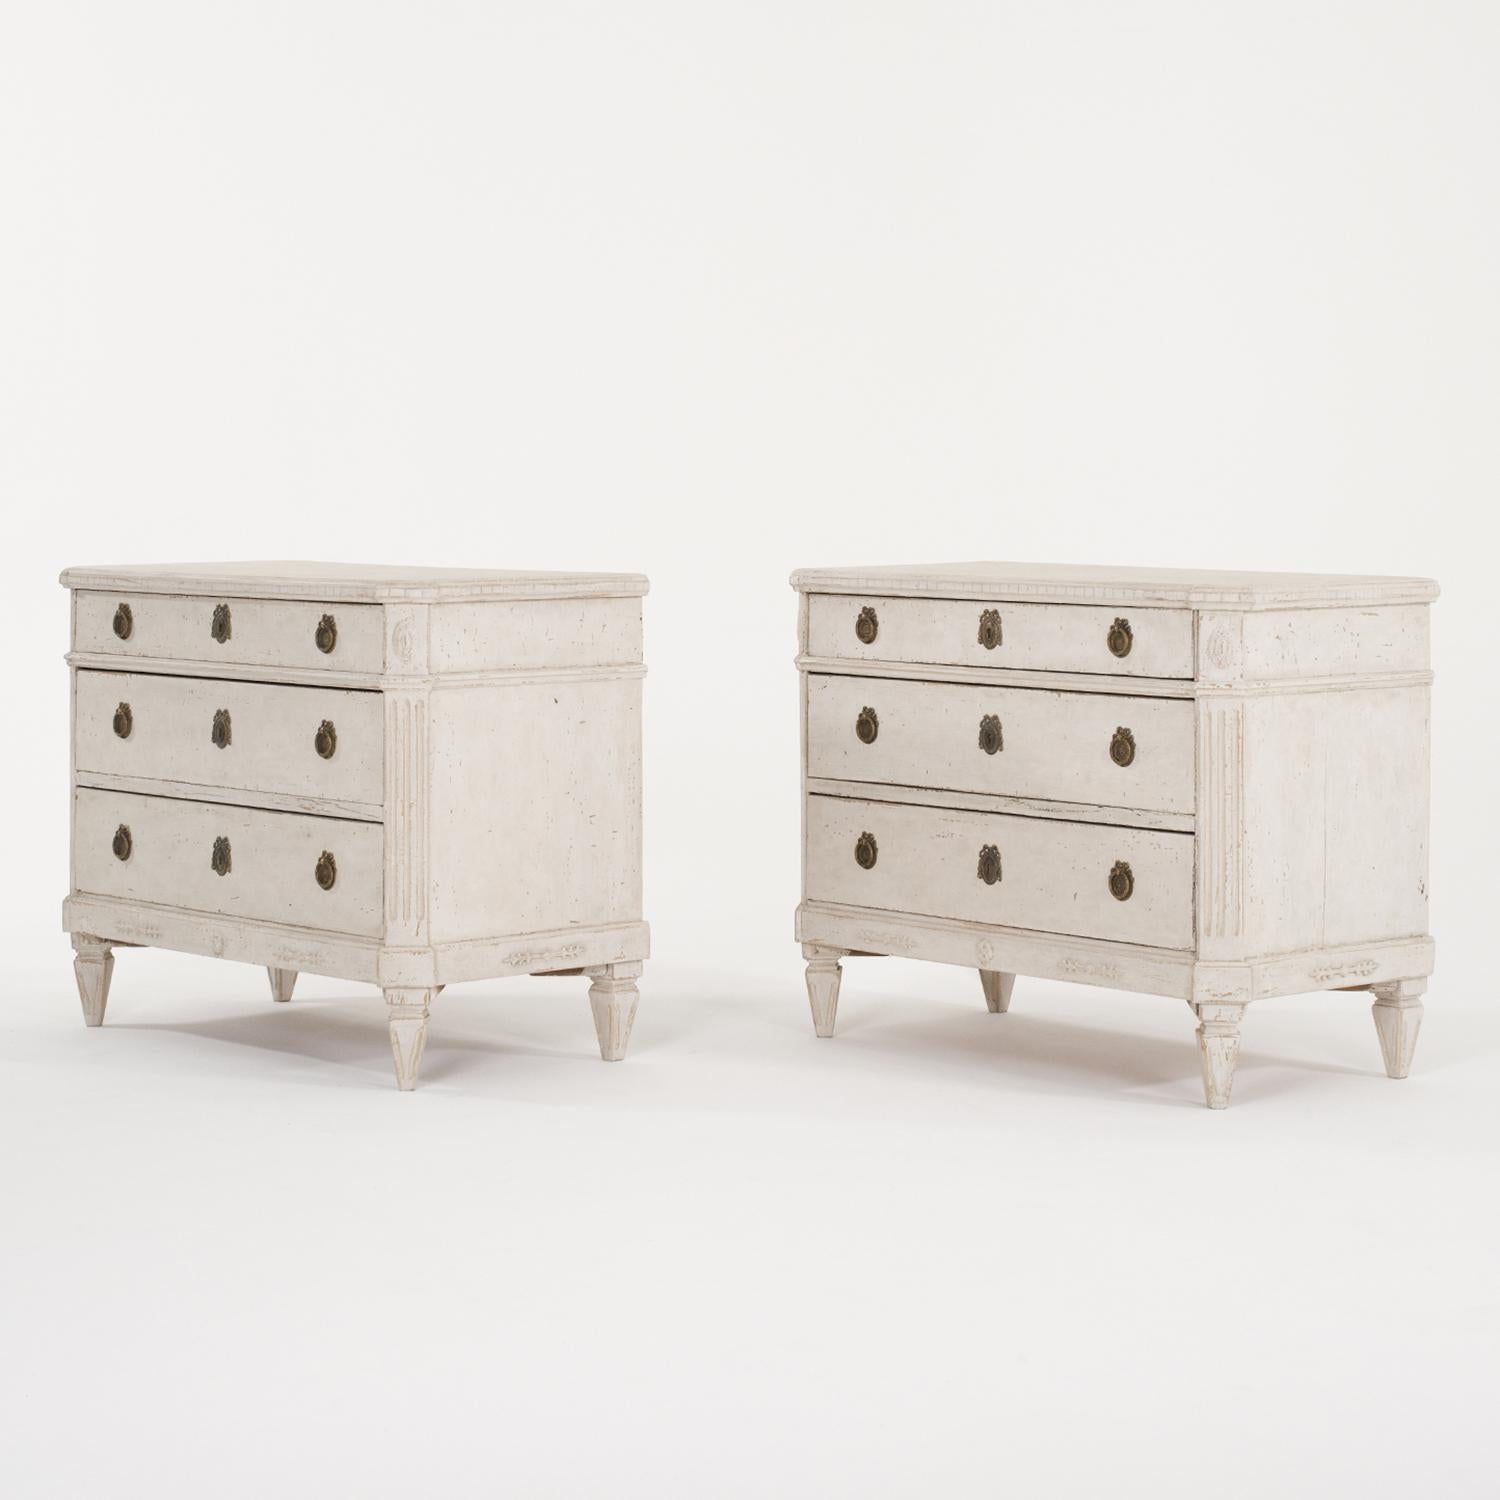 A 19th Century, light-grey antique Swedish Gustavian pair of chests made of hand crafted painted Pinewood with two large drawers and one small one, in good condition. The Scandinavian cabinets are enhanced by detailed wood carvings, standing on four